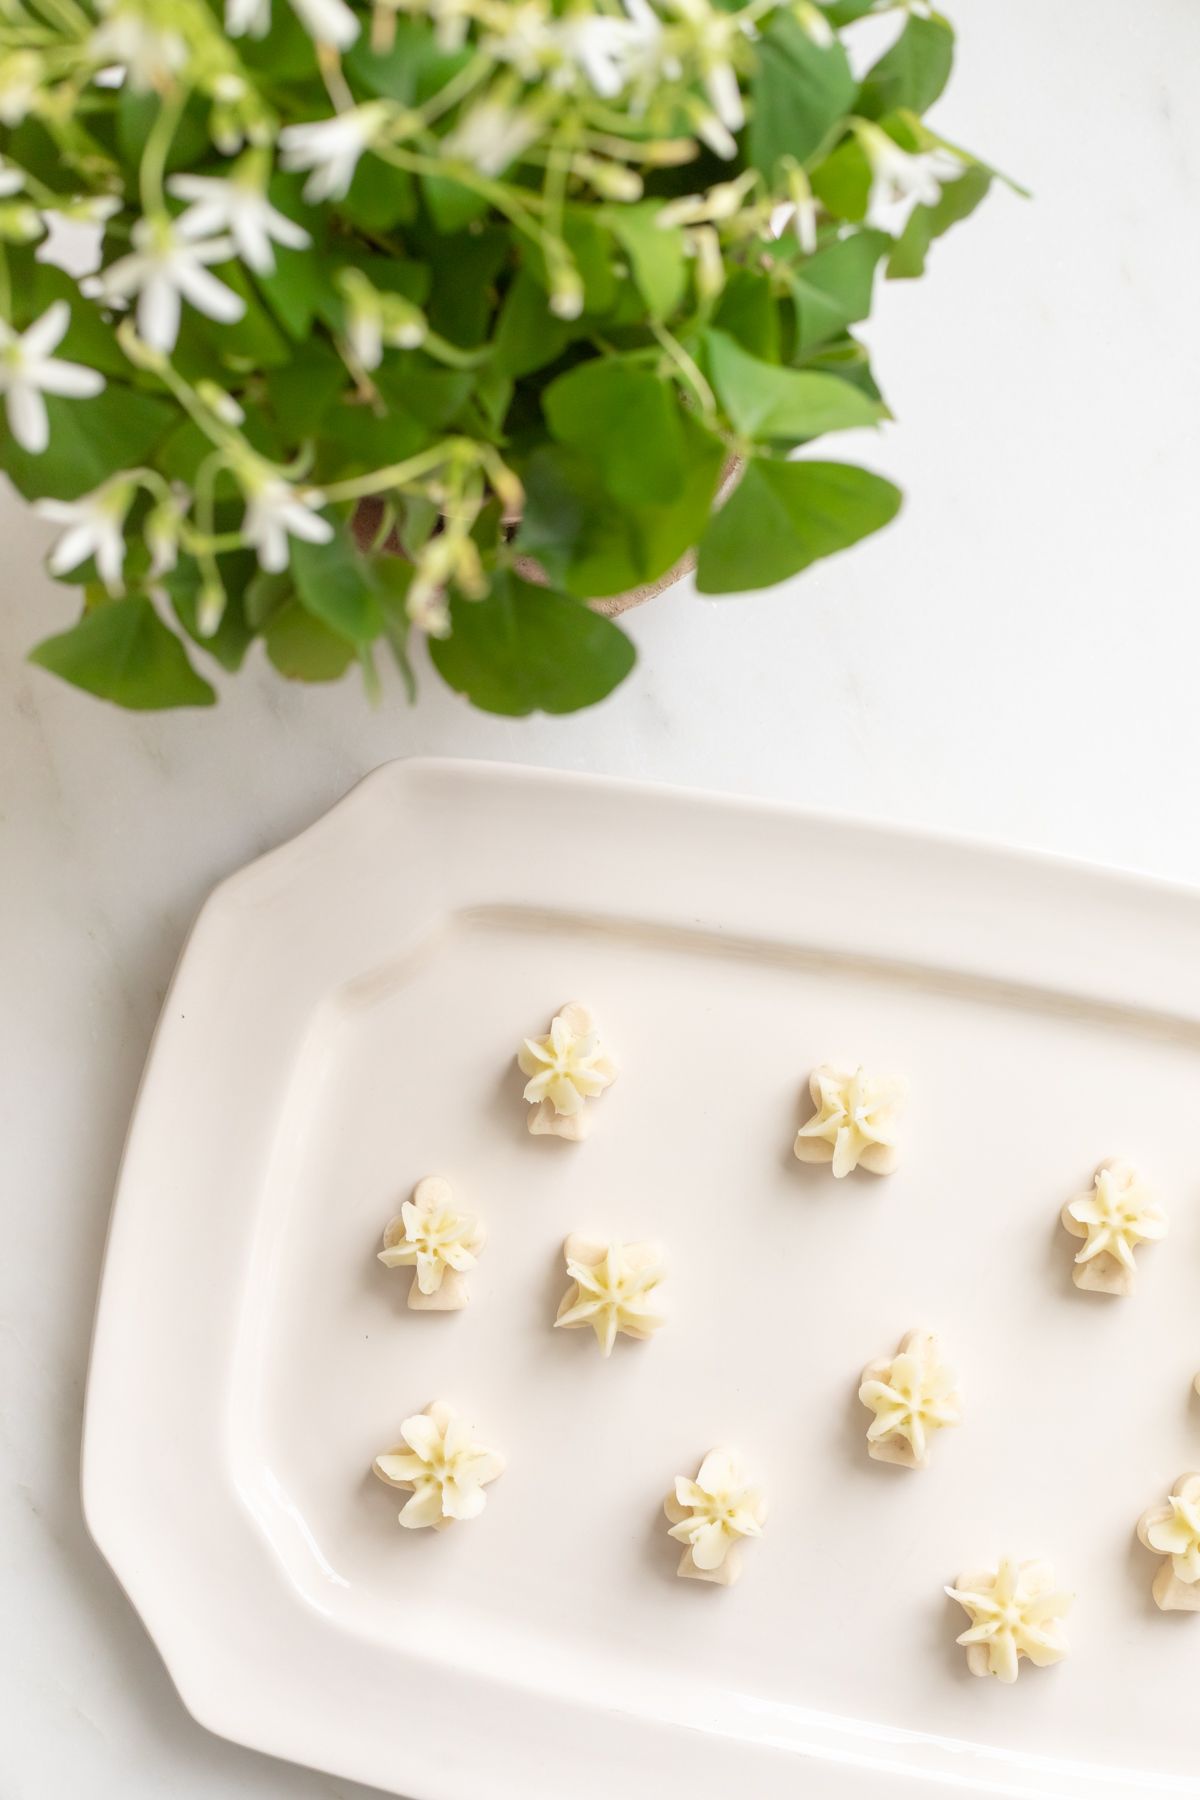 A white platter full of frosted key lime cookies.